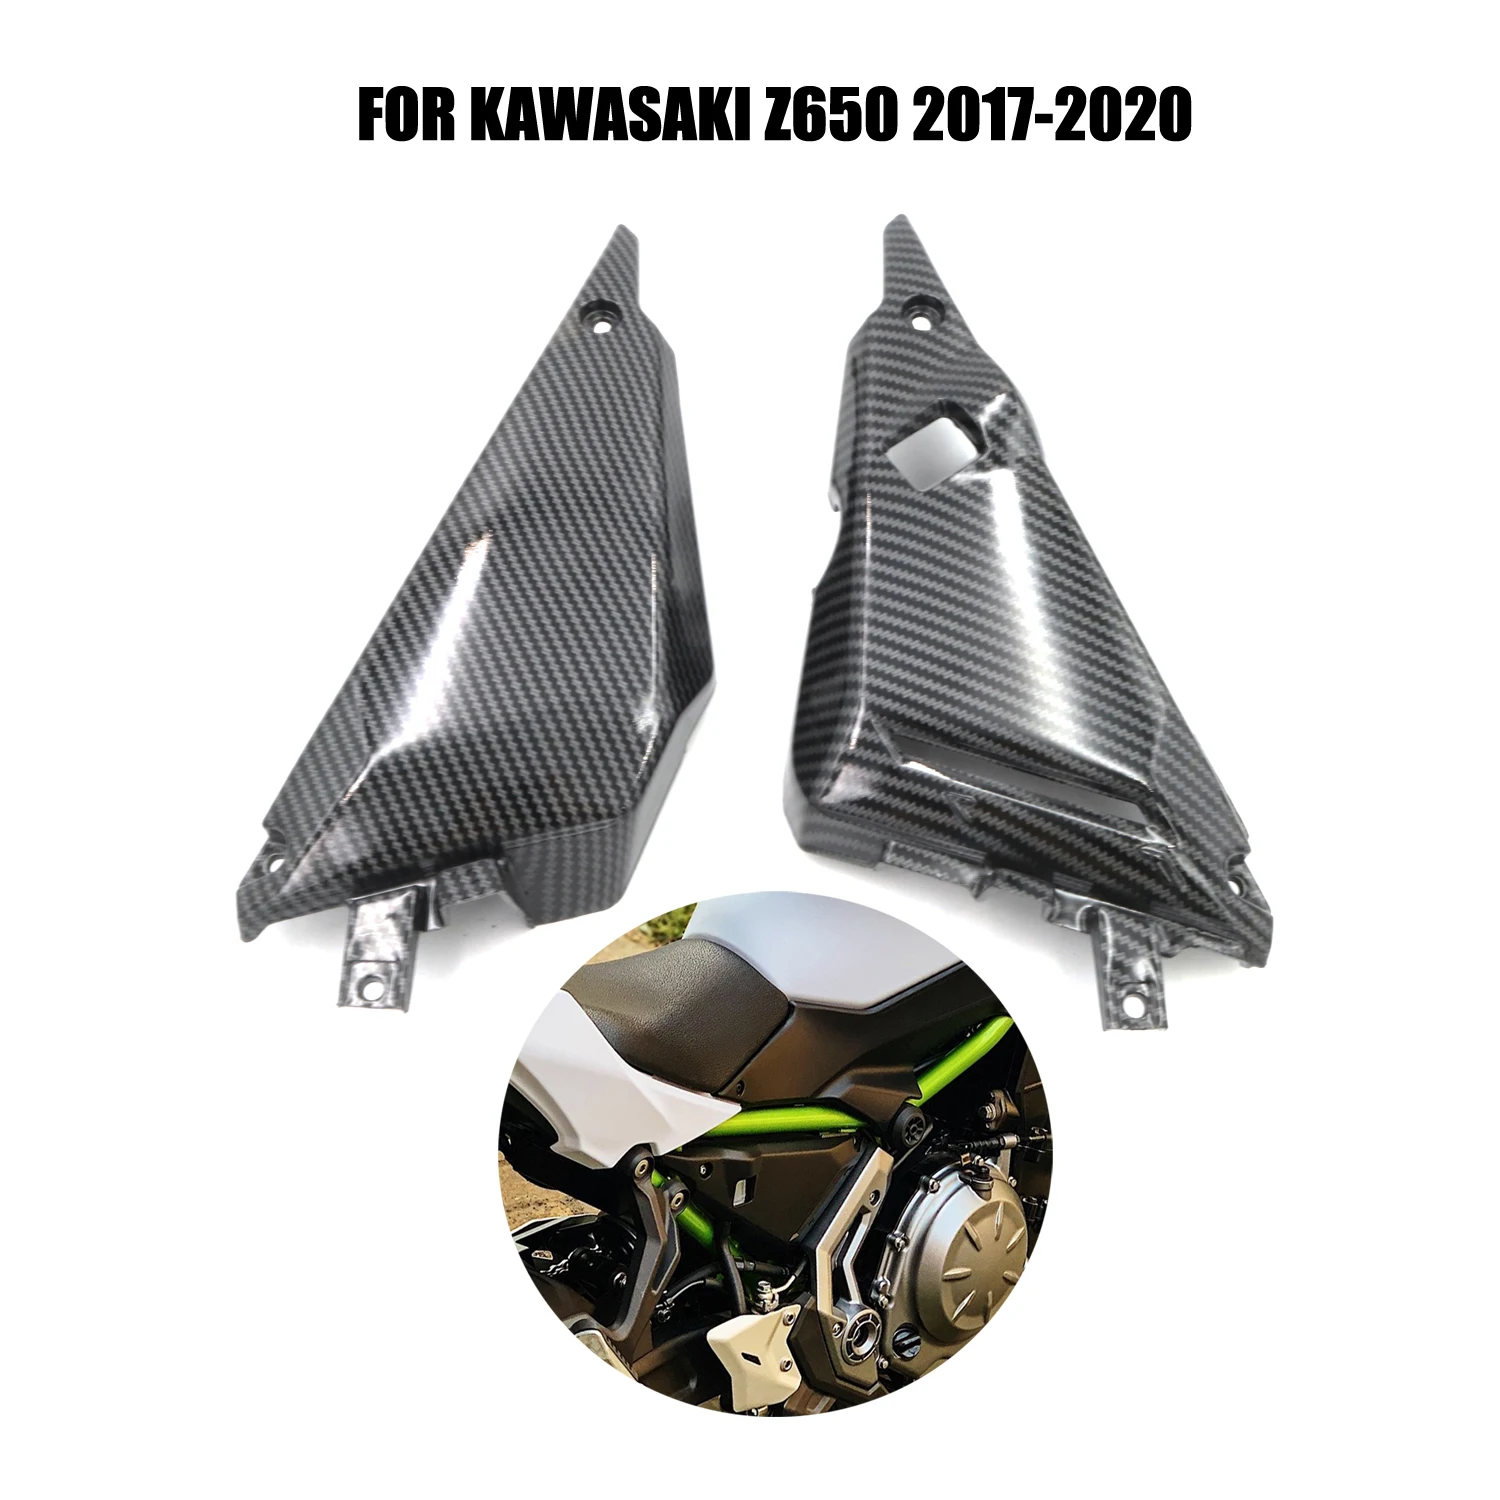 Motorcycle ABS With Carbon Fiber Paint Front Frame Side Cover Cowl Panel Trim Body Fairings For Kawasaki Z650 2017 - 2020